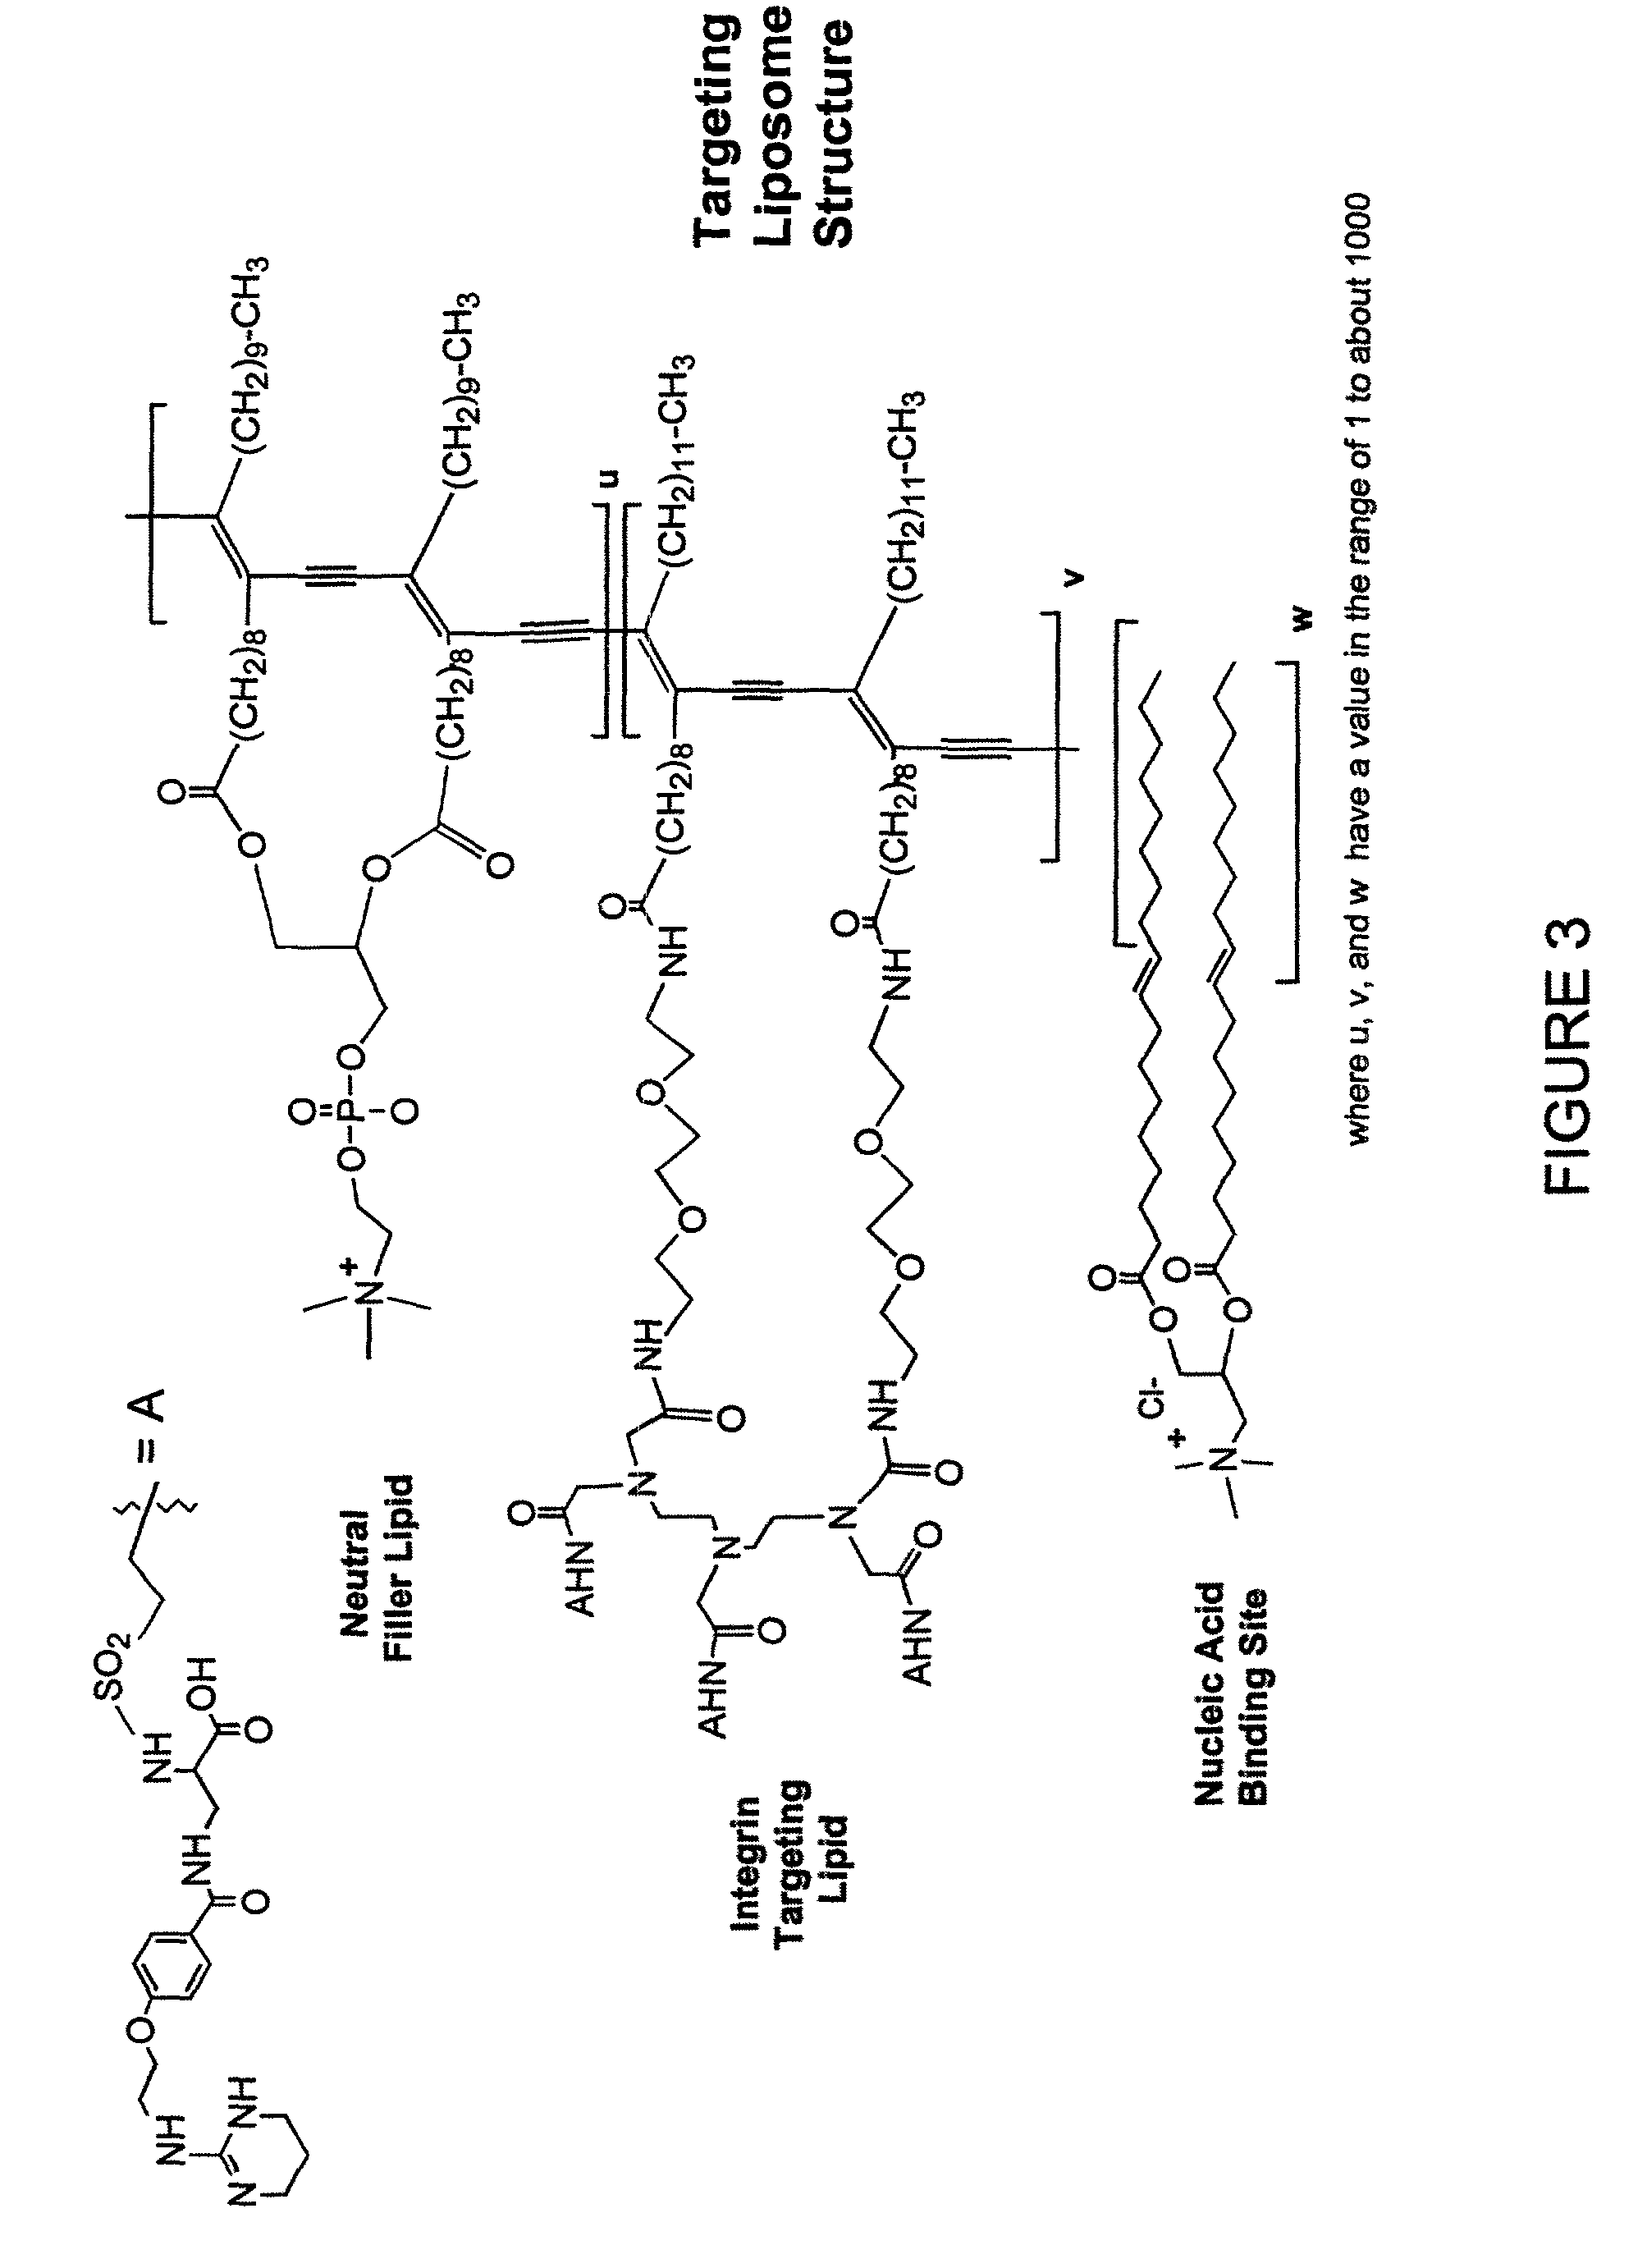 Delivery system for nucleic acids